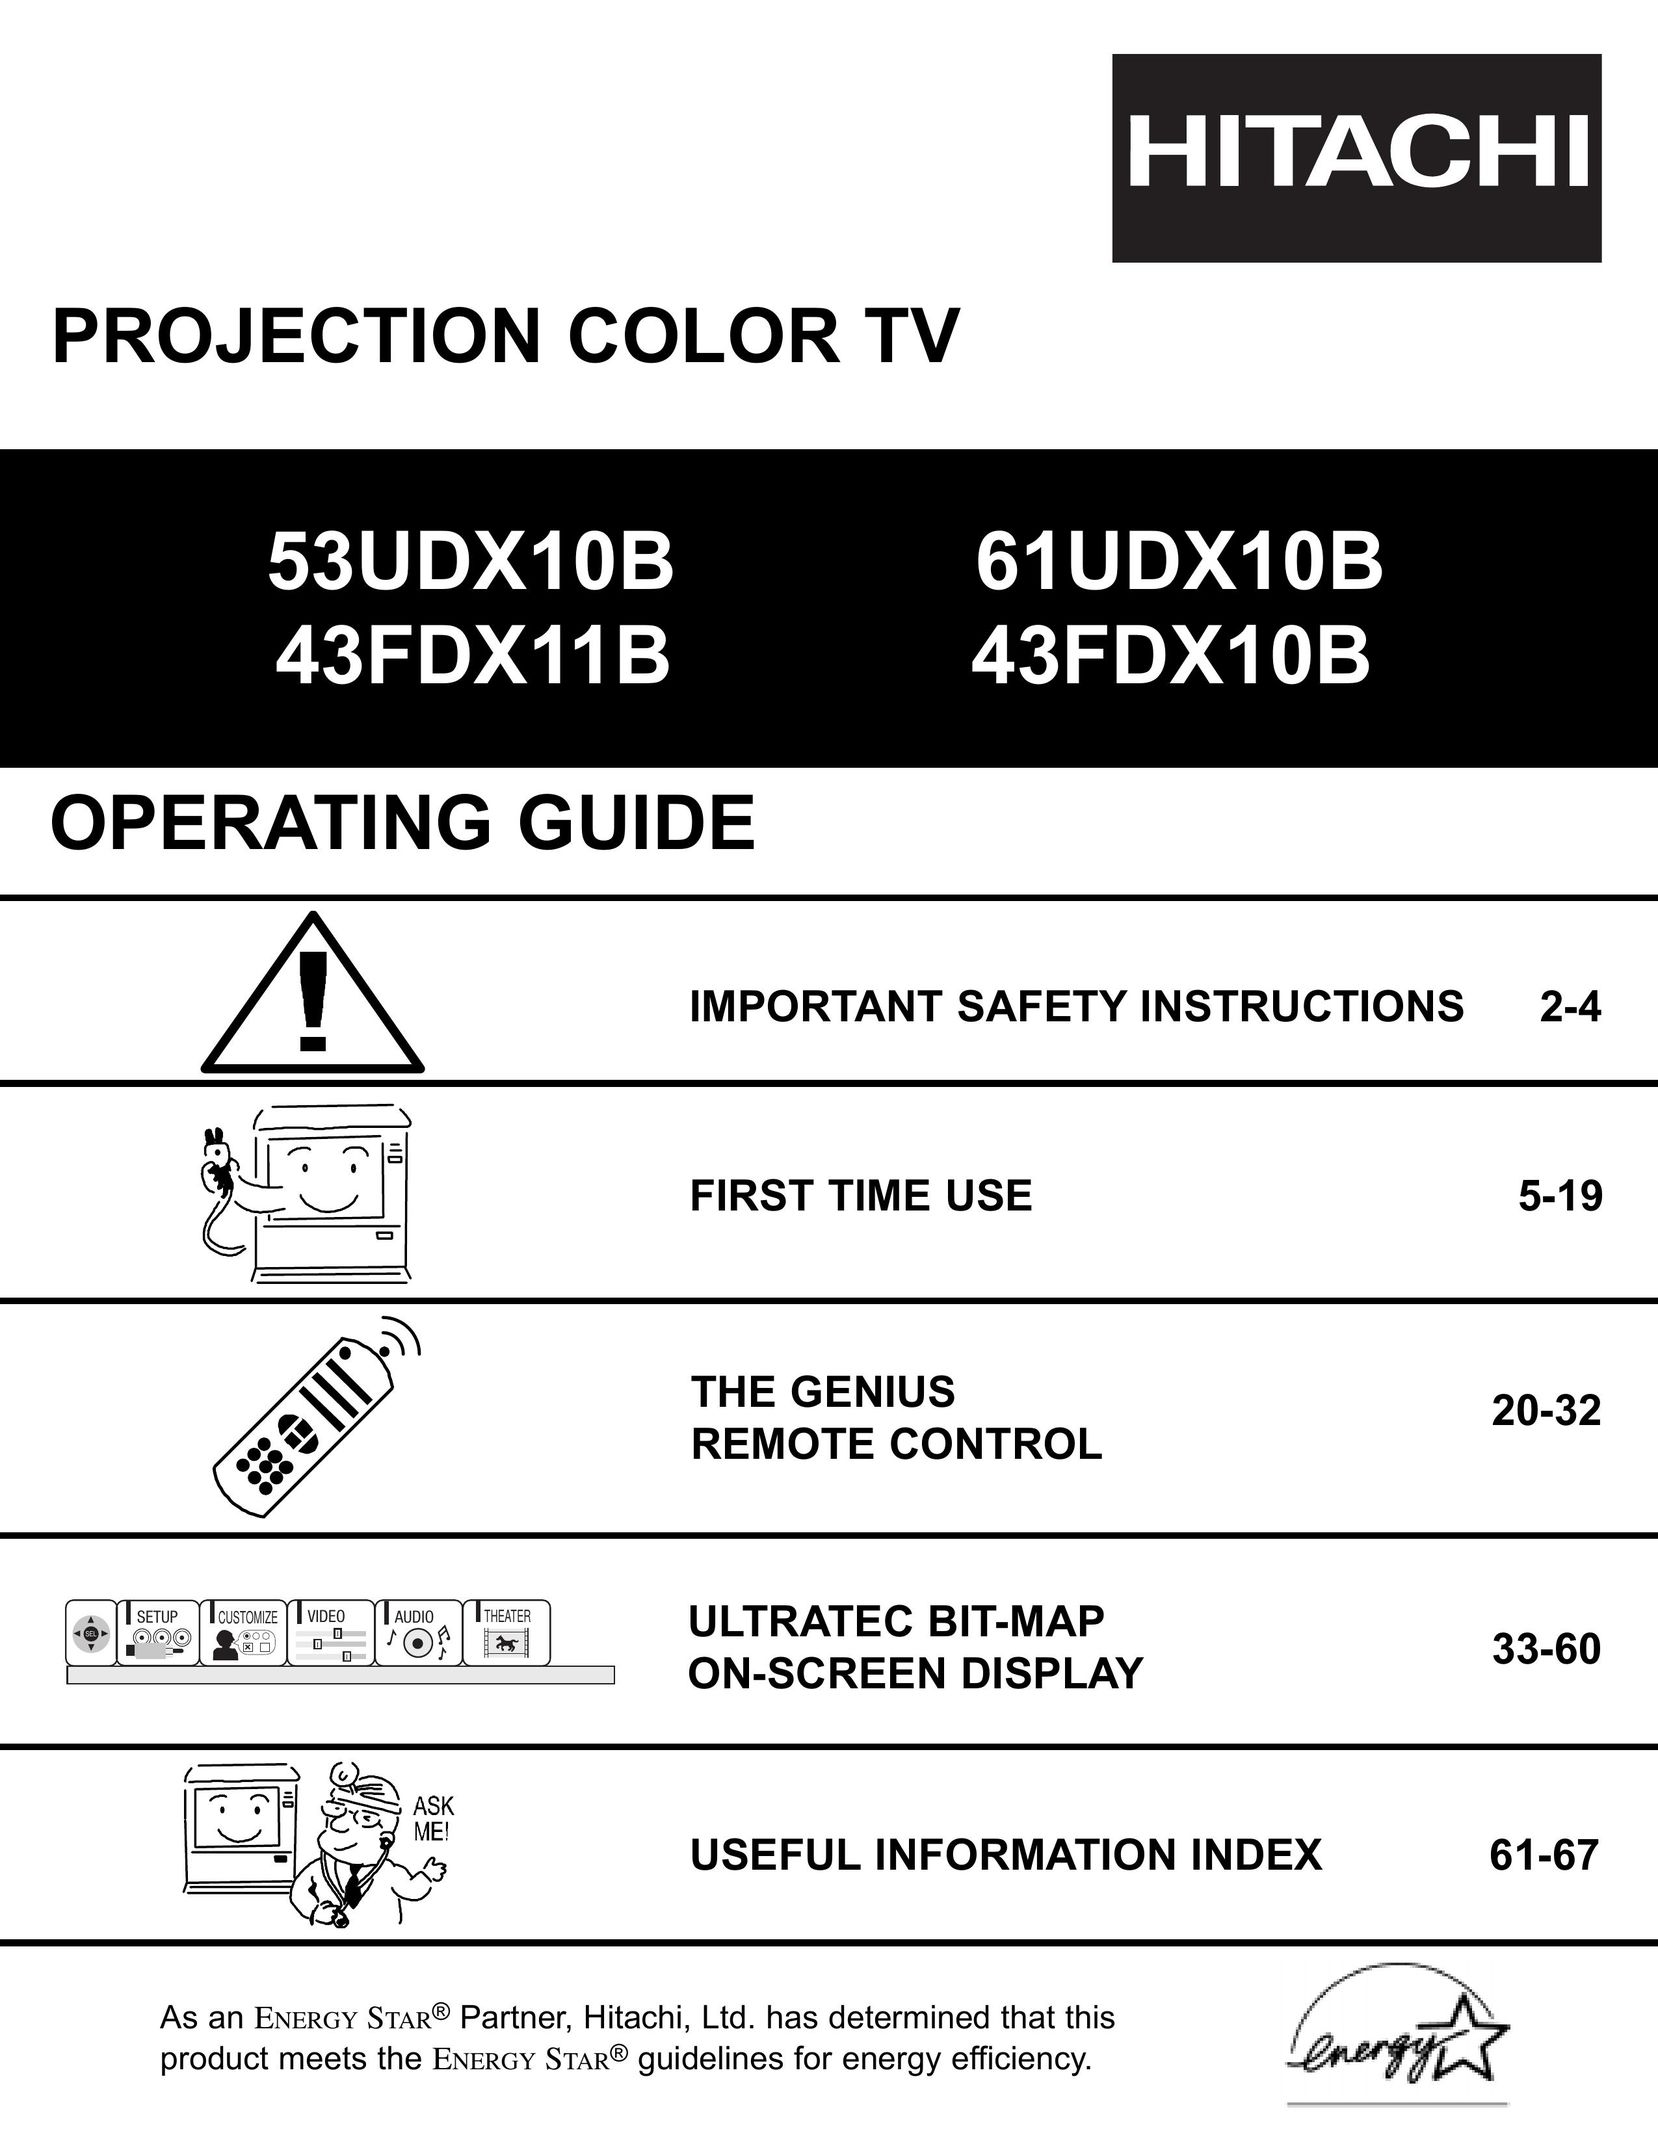 Ultratec 61UDX10B Projection Television User Manual